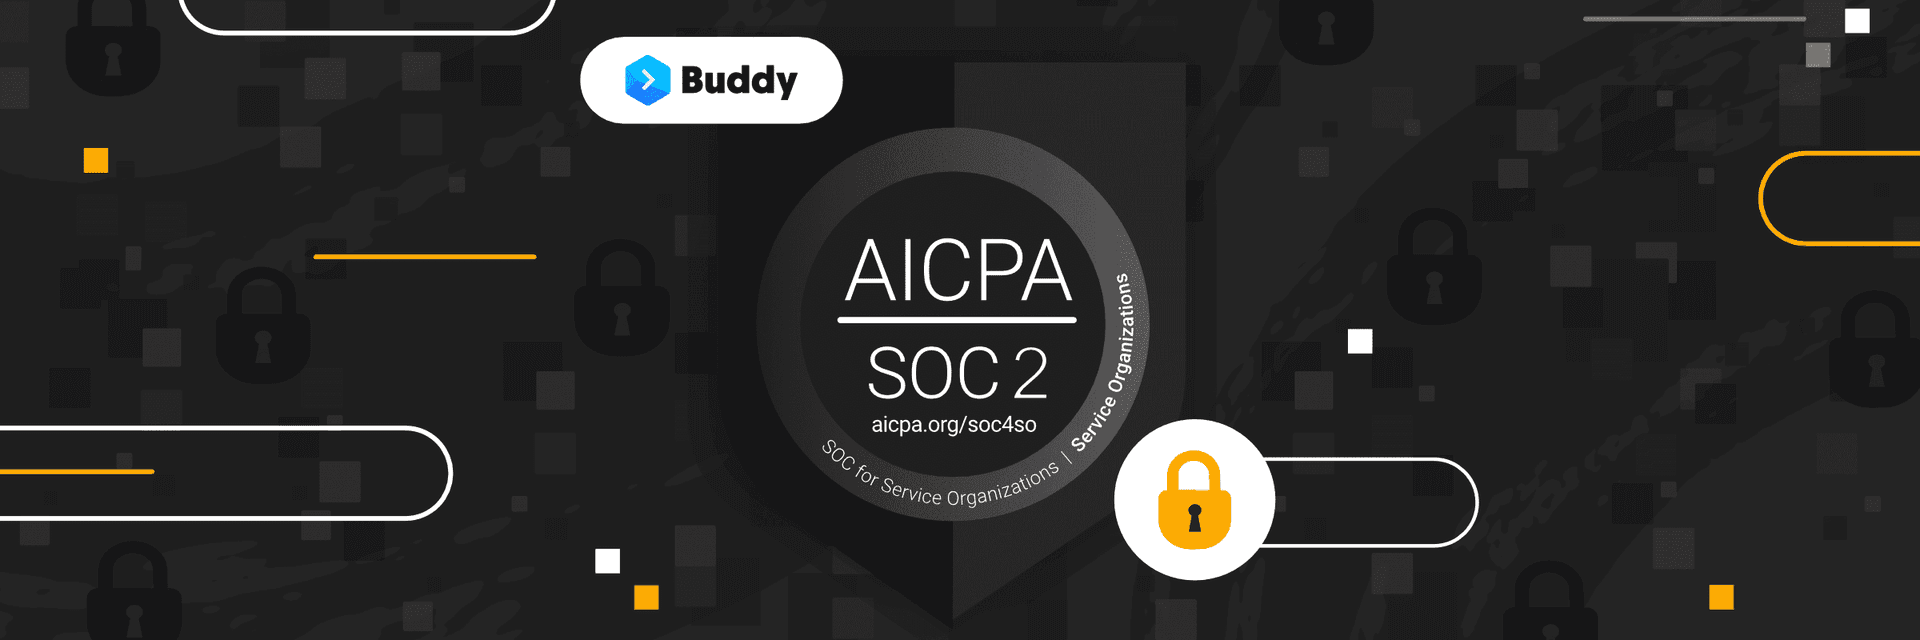 In Buddy we trust: Announcing SOC 2 certification